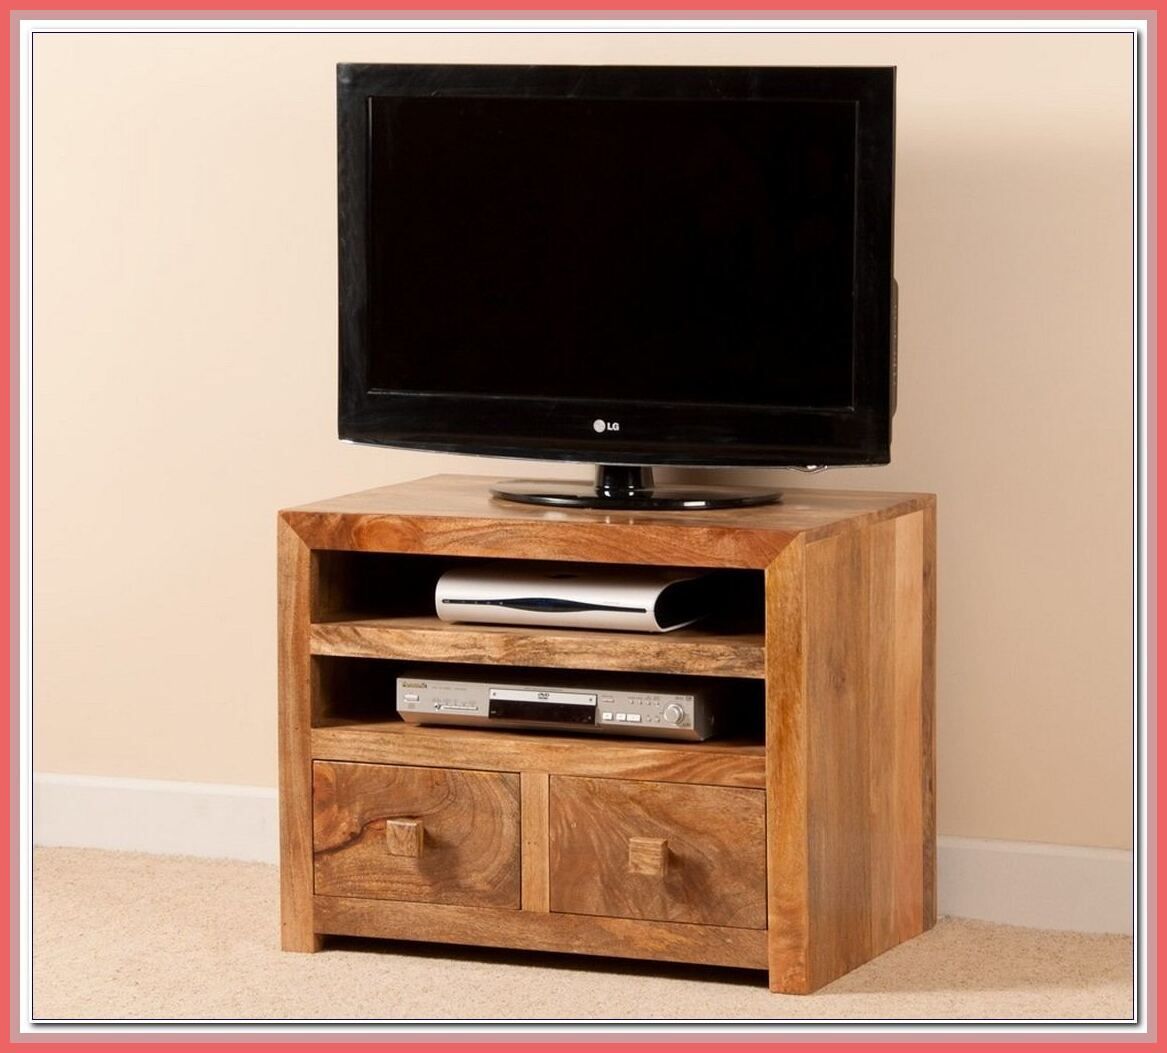 105 Reference Of Tv Stand Long Skinny In 2020 | Bedroom Tv Within Tall Skinny Tv Stands (Photo 10 of 15)